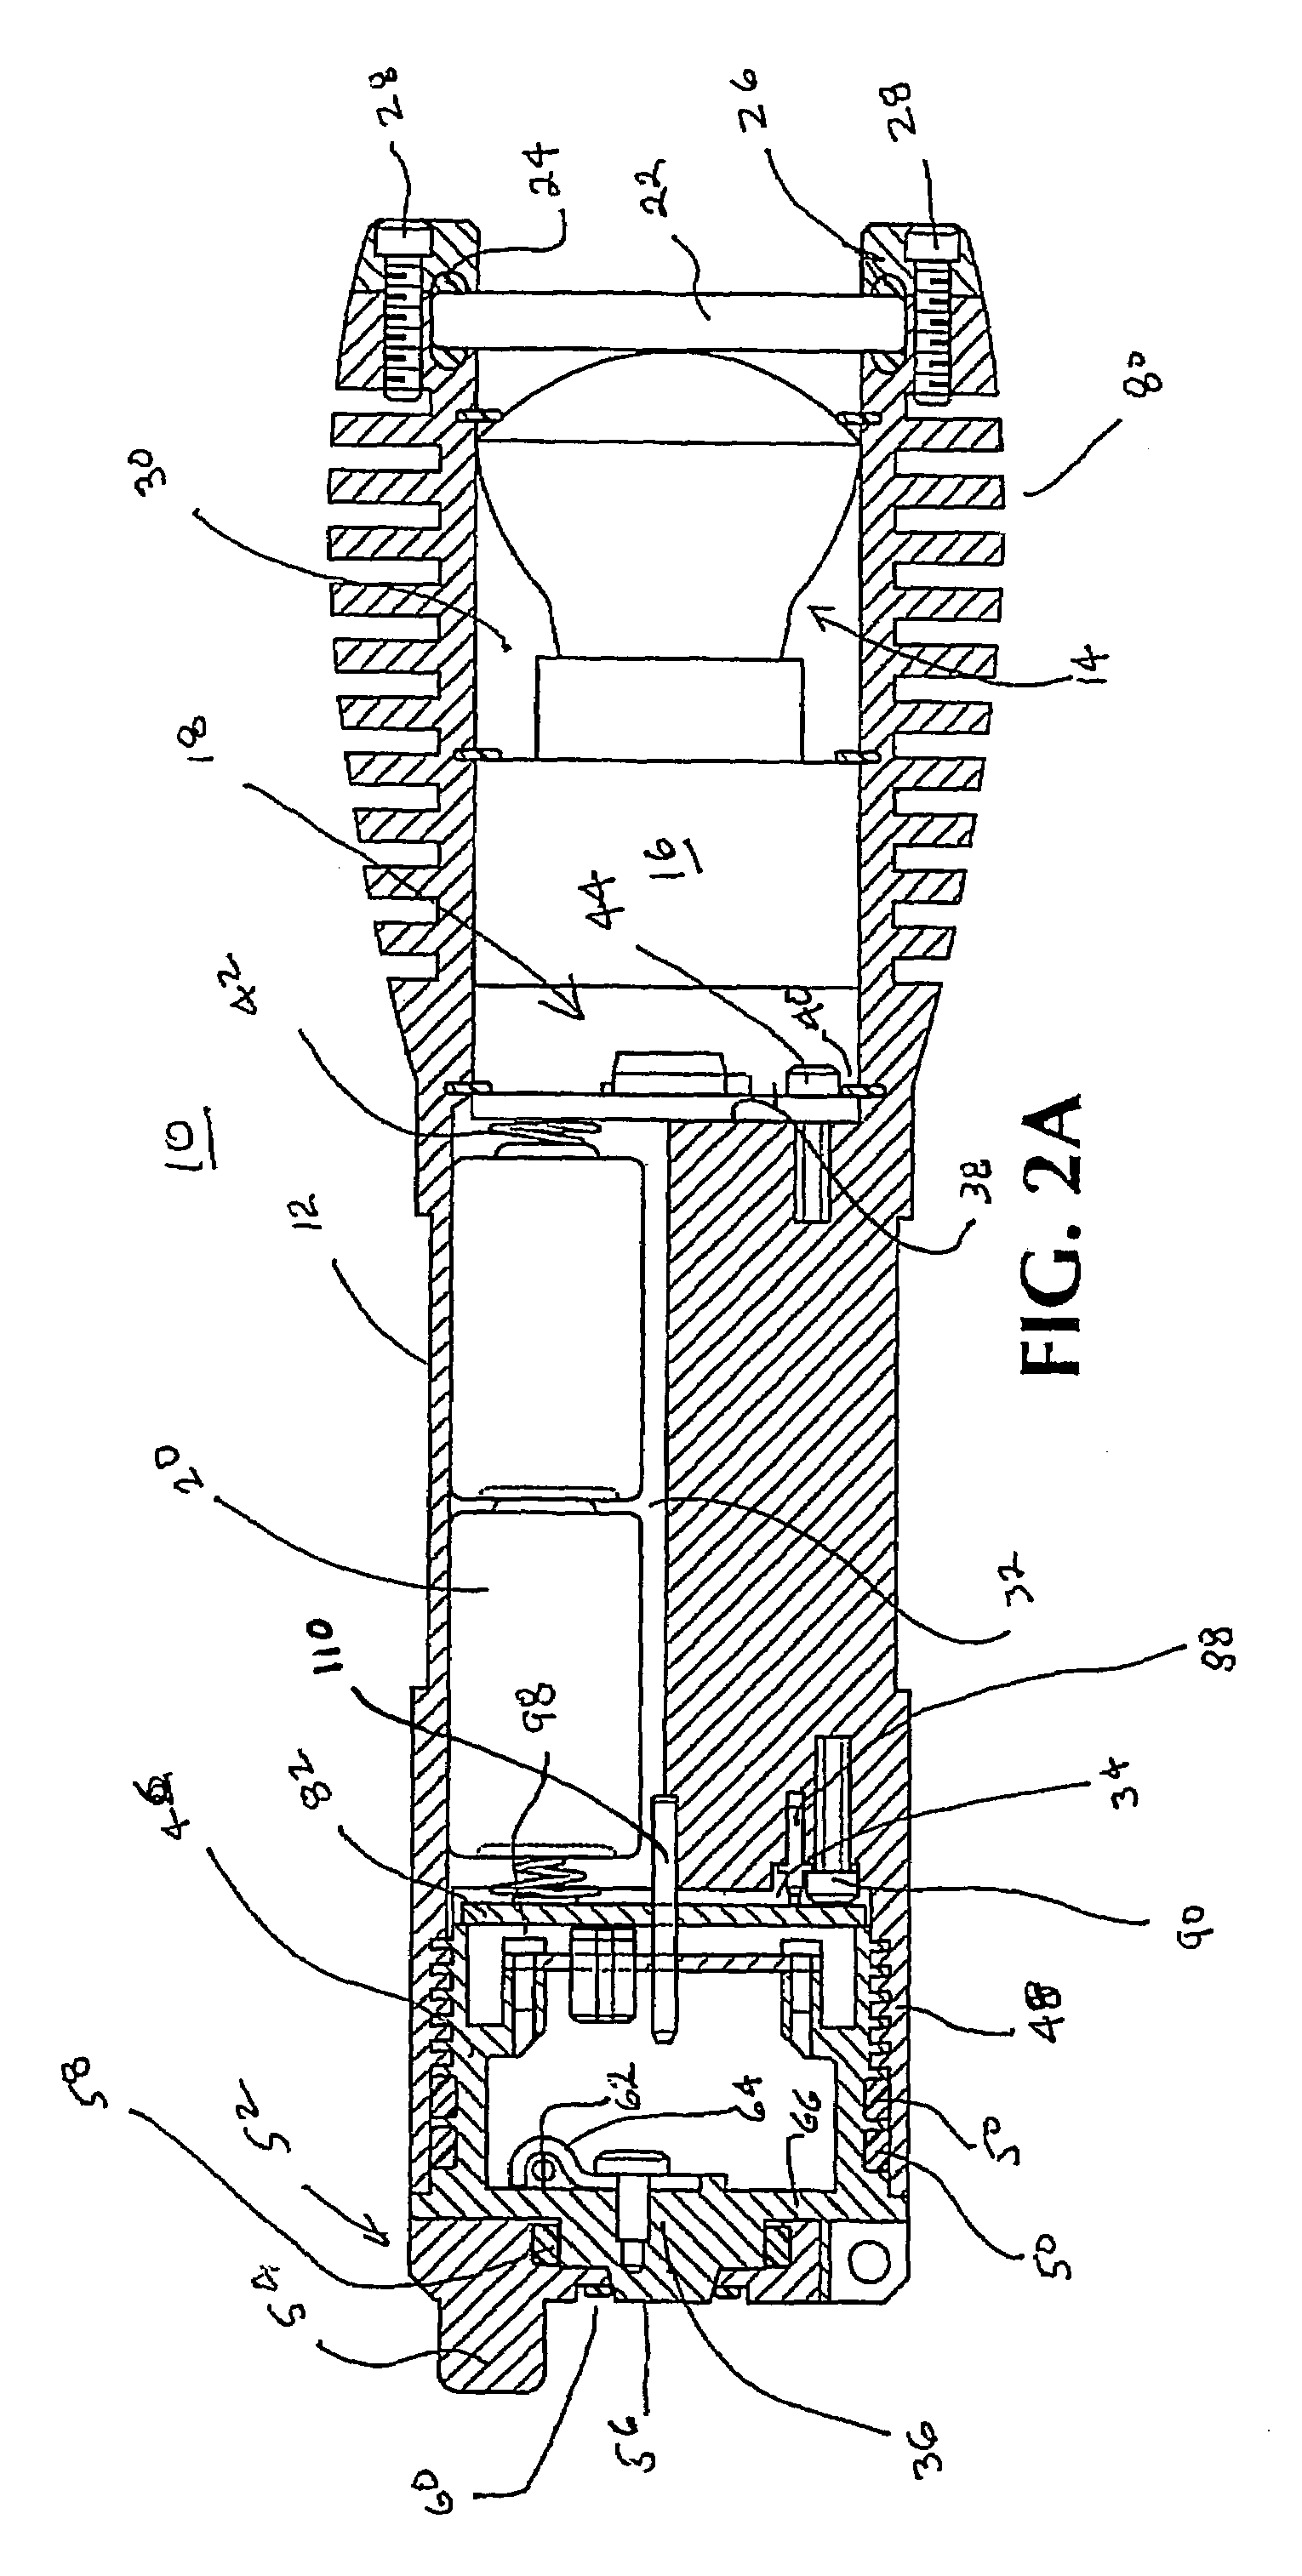 Waterproof flashlight including electronic power switch actuated by a mechanical switch